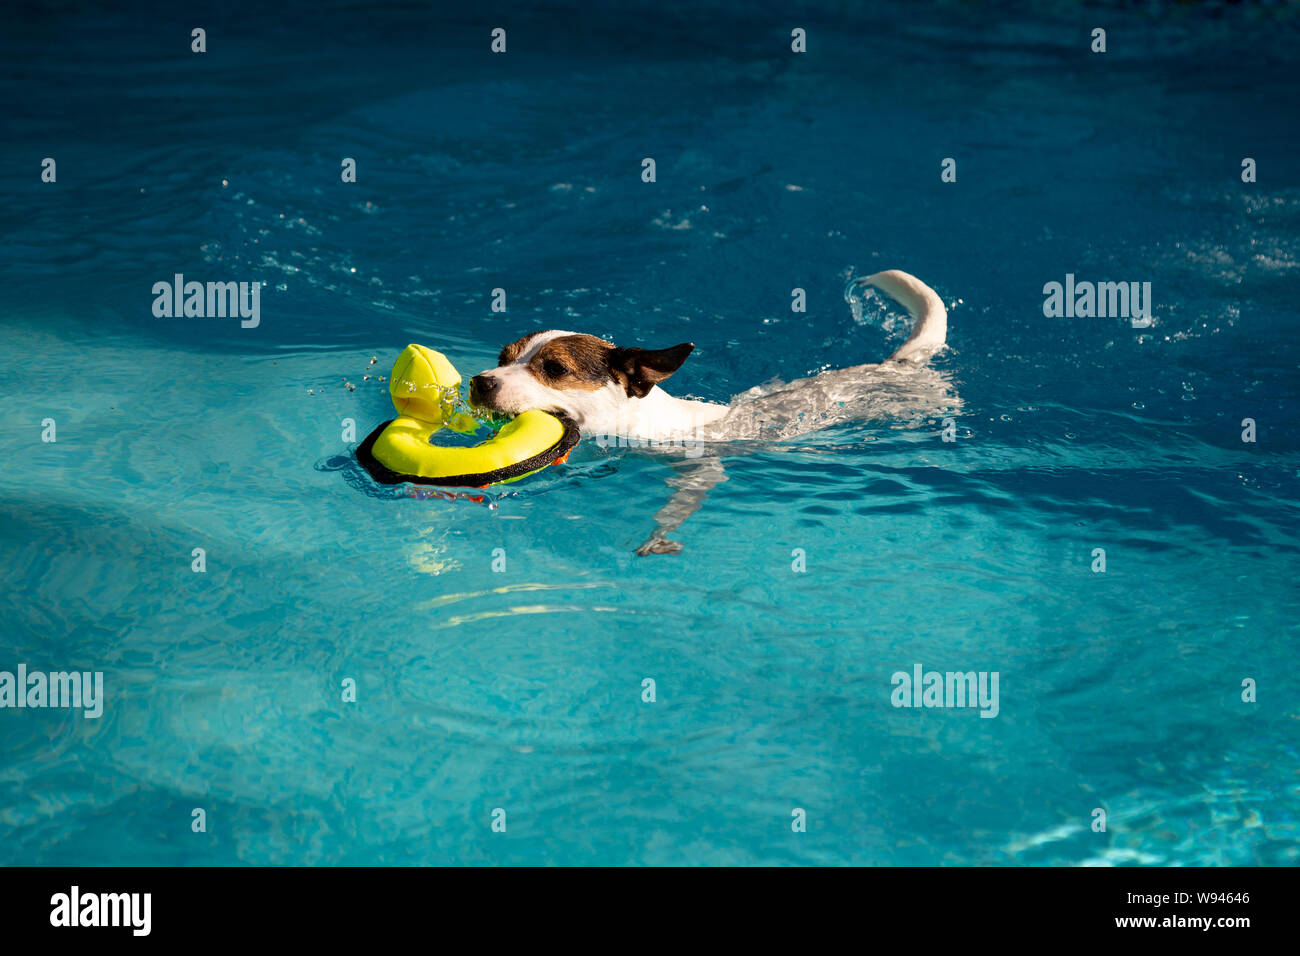 Playful dog swimming smoothly with yellow toy duck in mouth in a backyard swimming pool on a sunny day Stock Photo